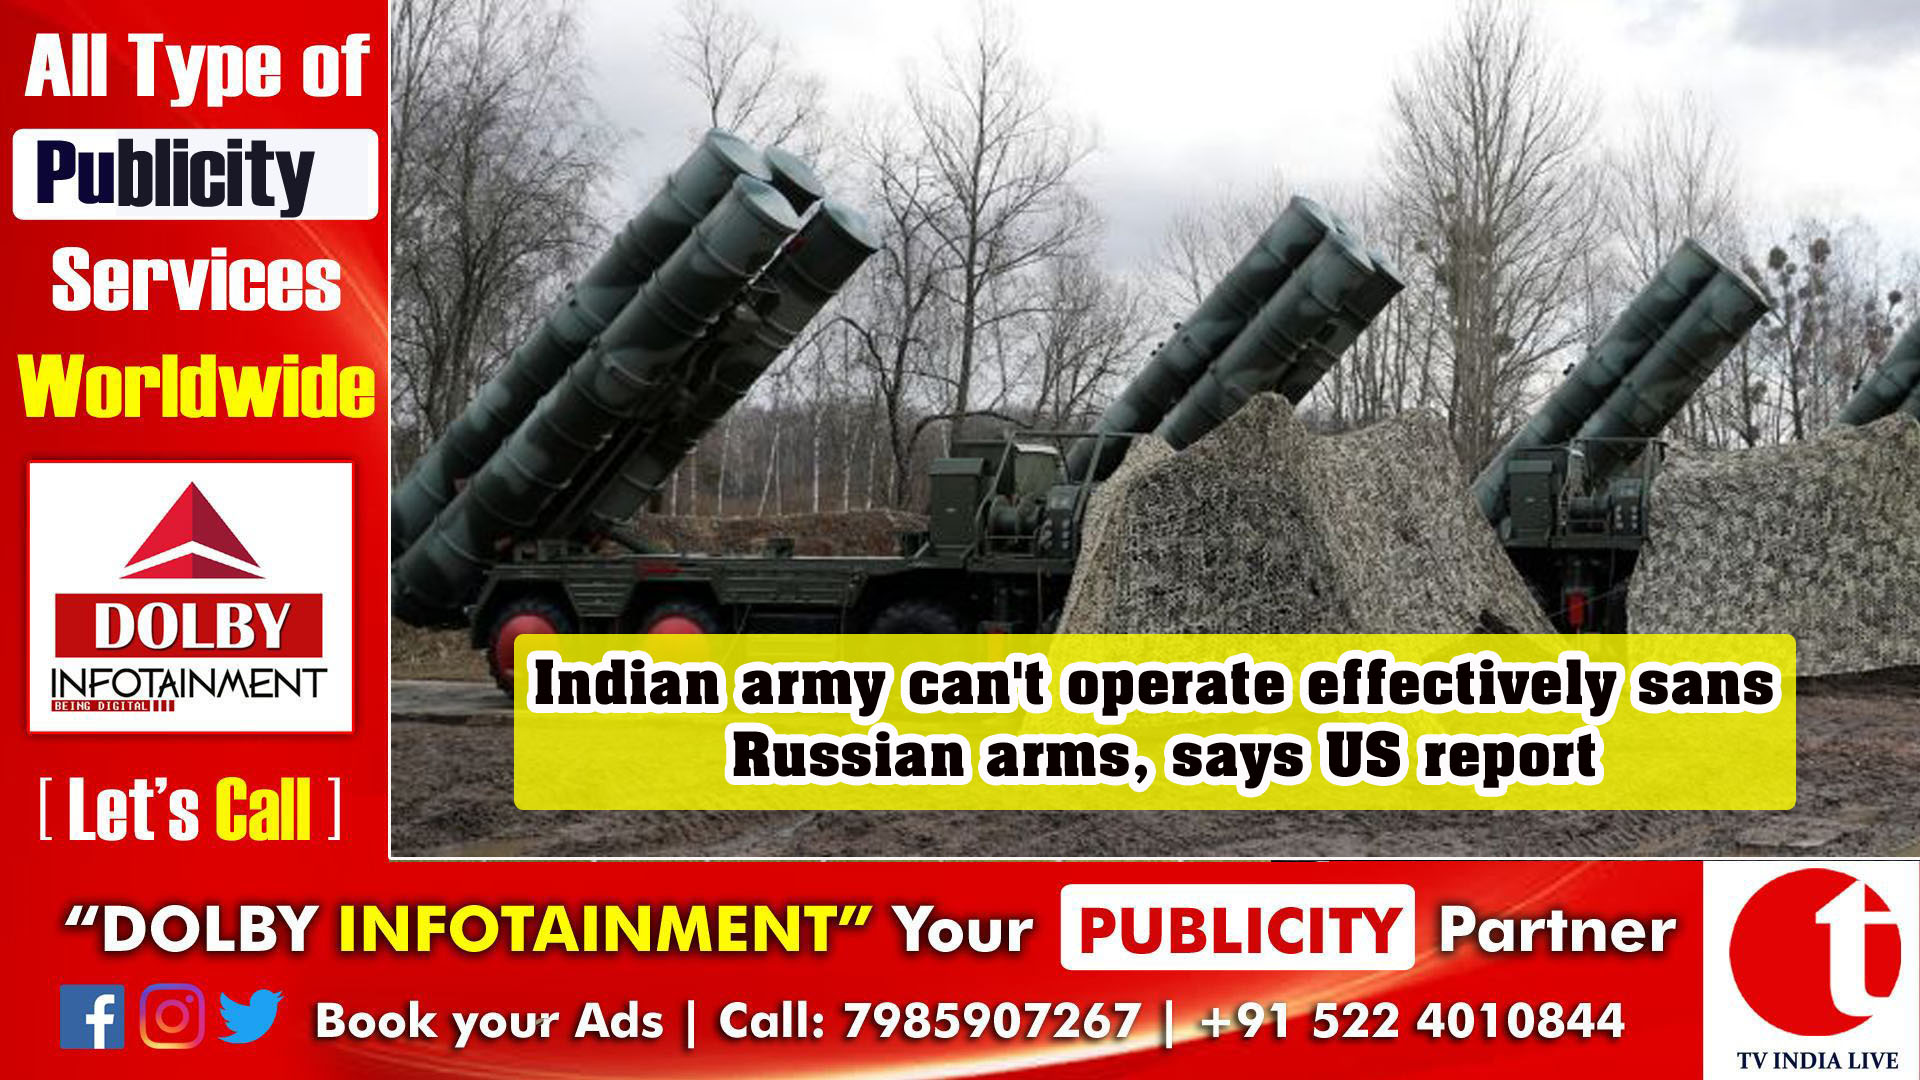 Indian army can't operate effectively sans Russian arms, says US report